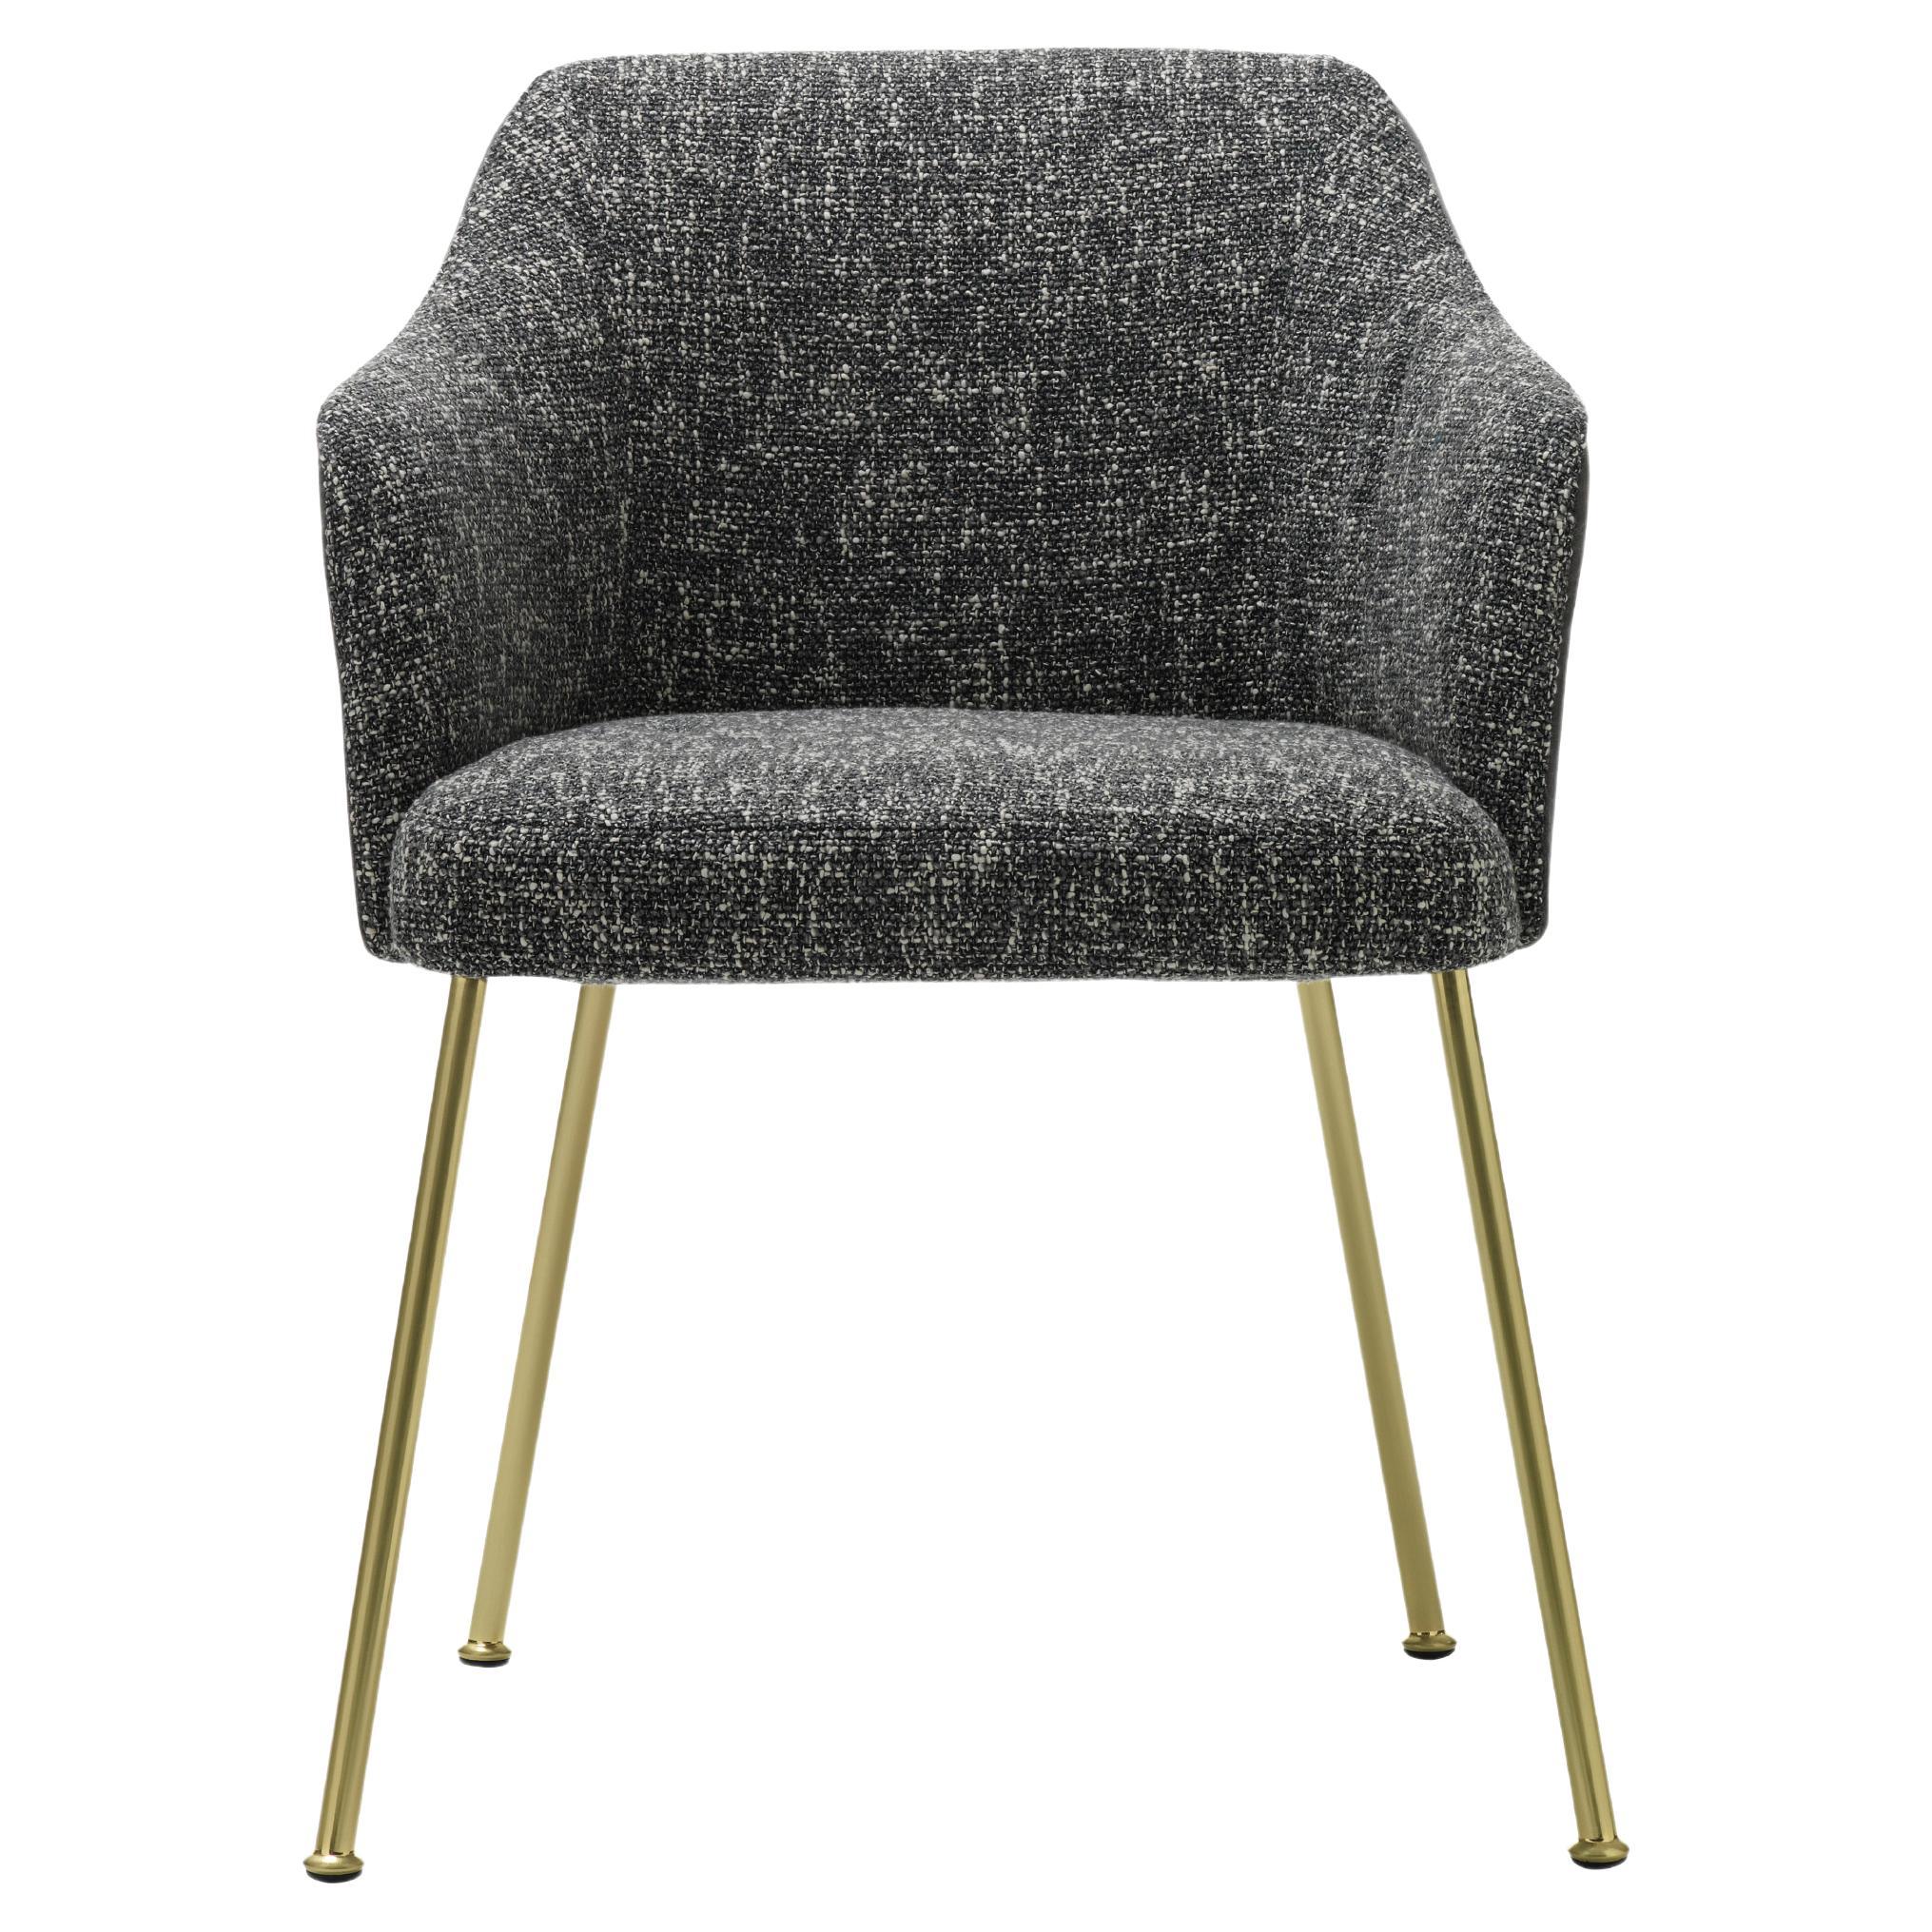 Isabelle Chair in Seventy Grey Upholstery with Satin Brass Legs by Saba